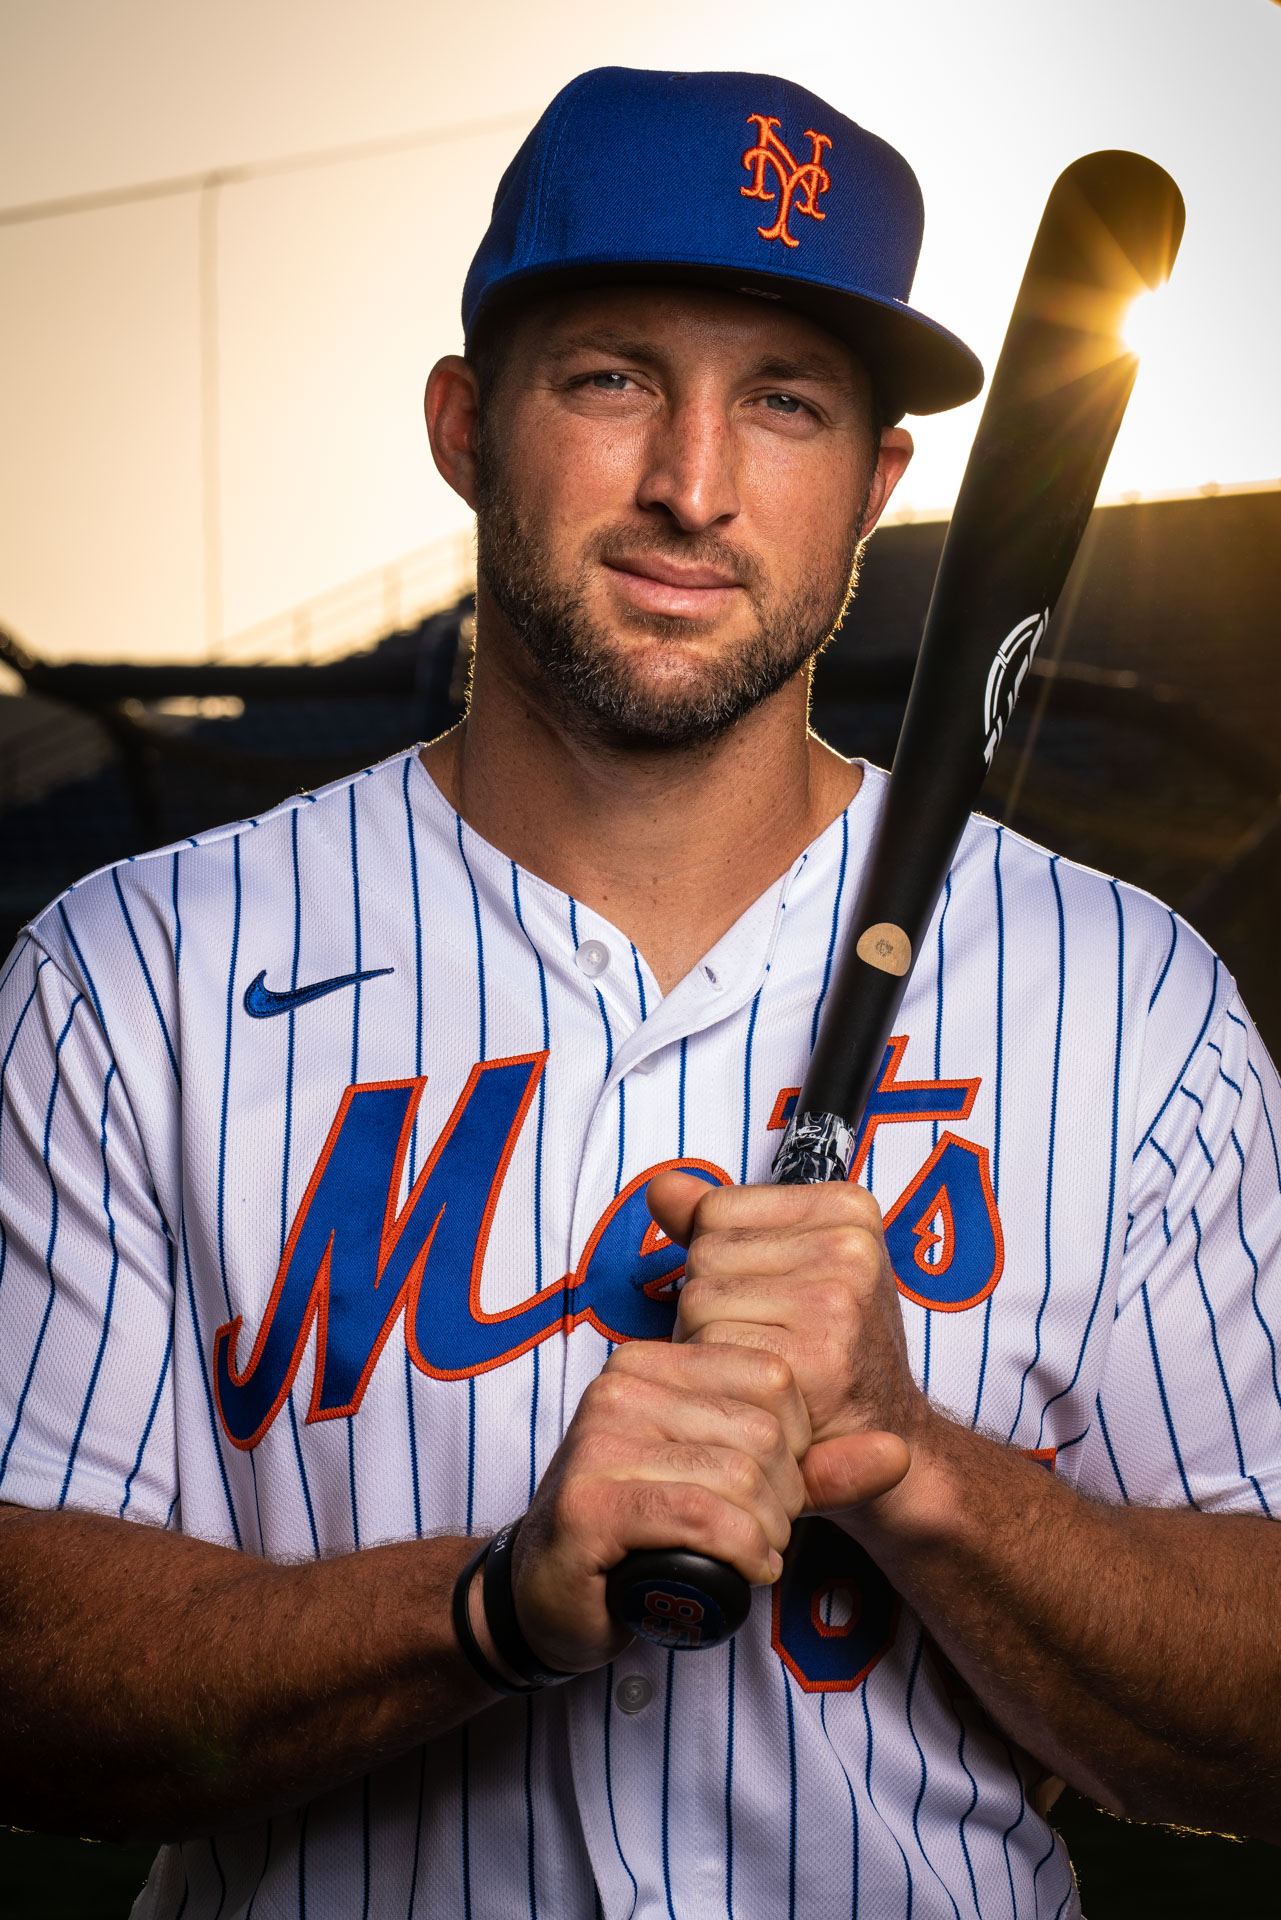 Florida Photography | Tim Tebow for the NY Mets | Steven Martine